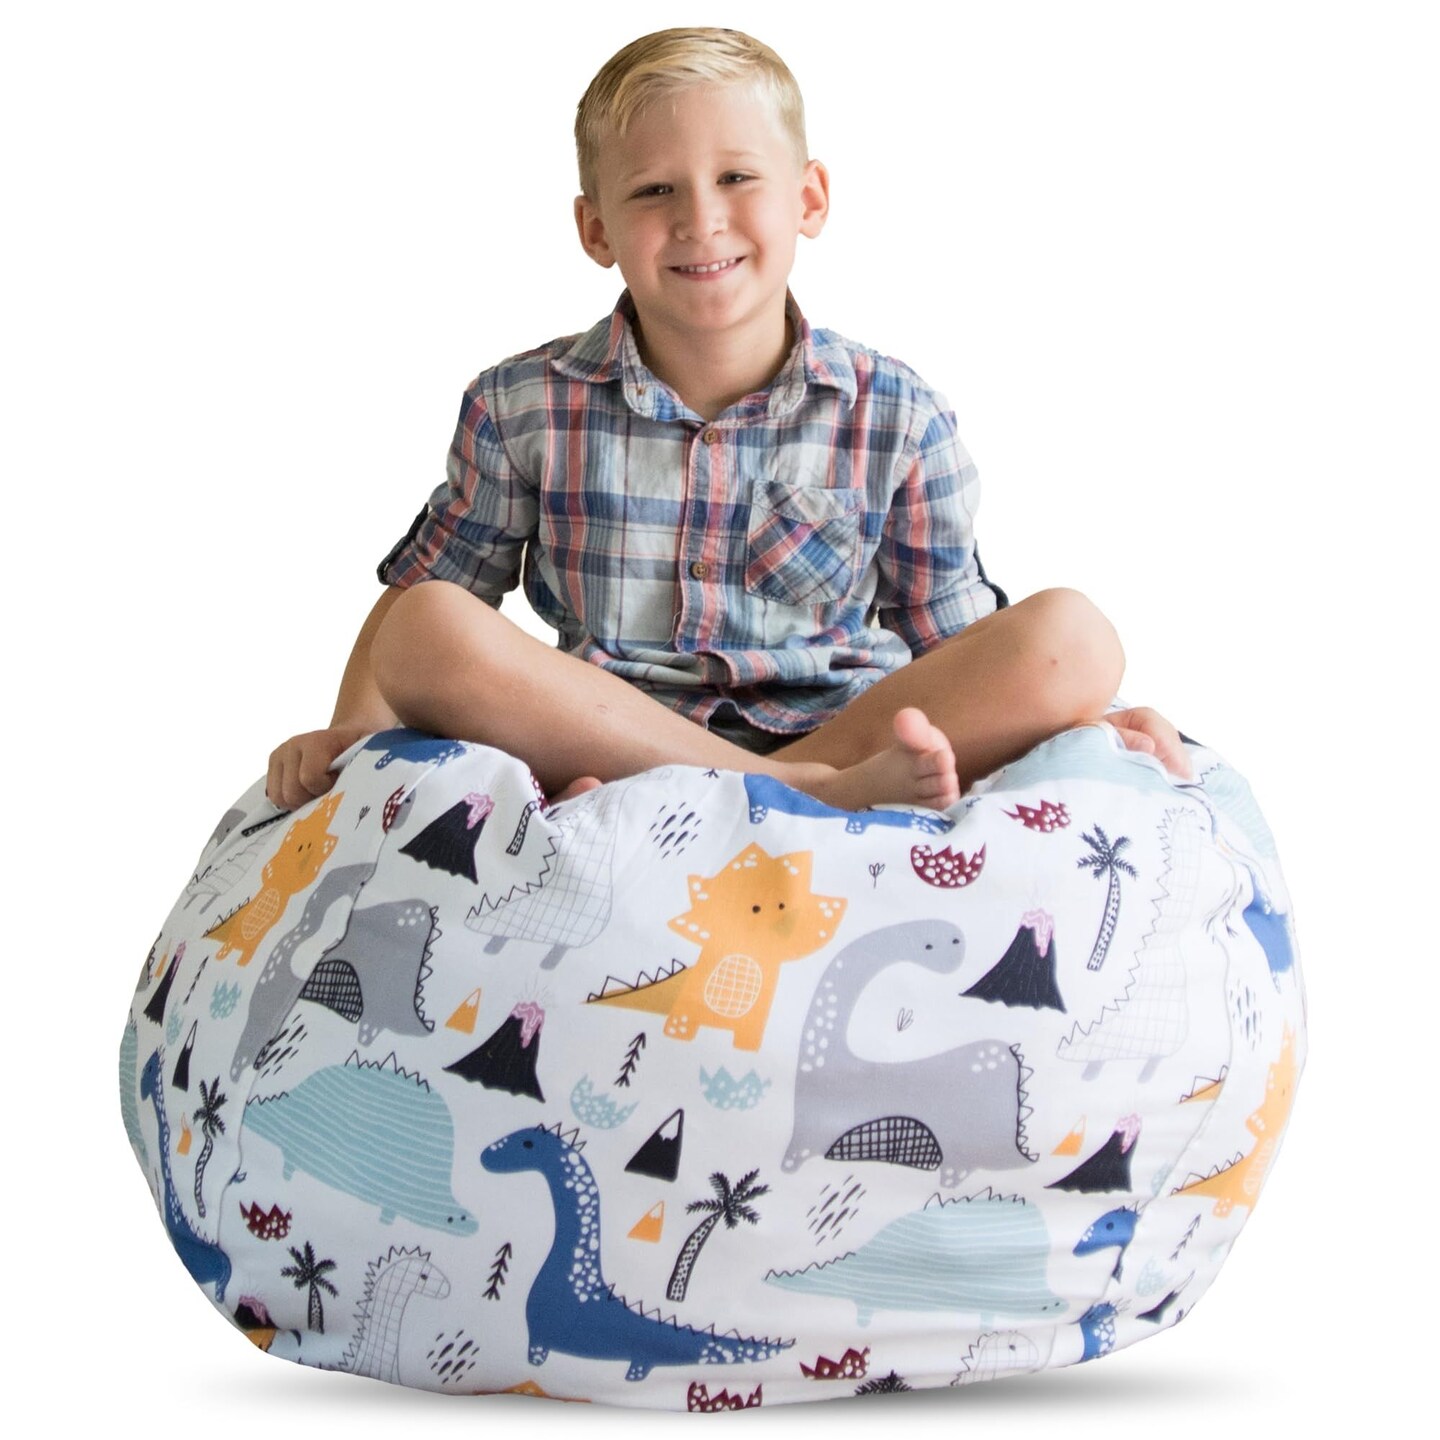 Creative QT Stuff &#x2019;n Sit Extra Large 38&#x2019;&#x2019; Bean Bag Storage Cover for Stuffed Animals &#x26; Toys, Giant Beanbag Chair for Plush, Toddler &#x26; Kids Rooms Bedroom Organizer, Dinosaur